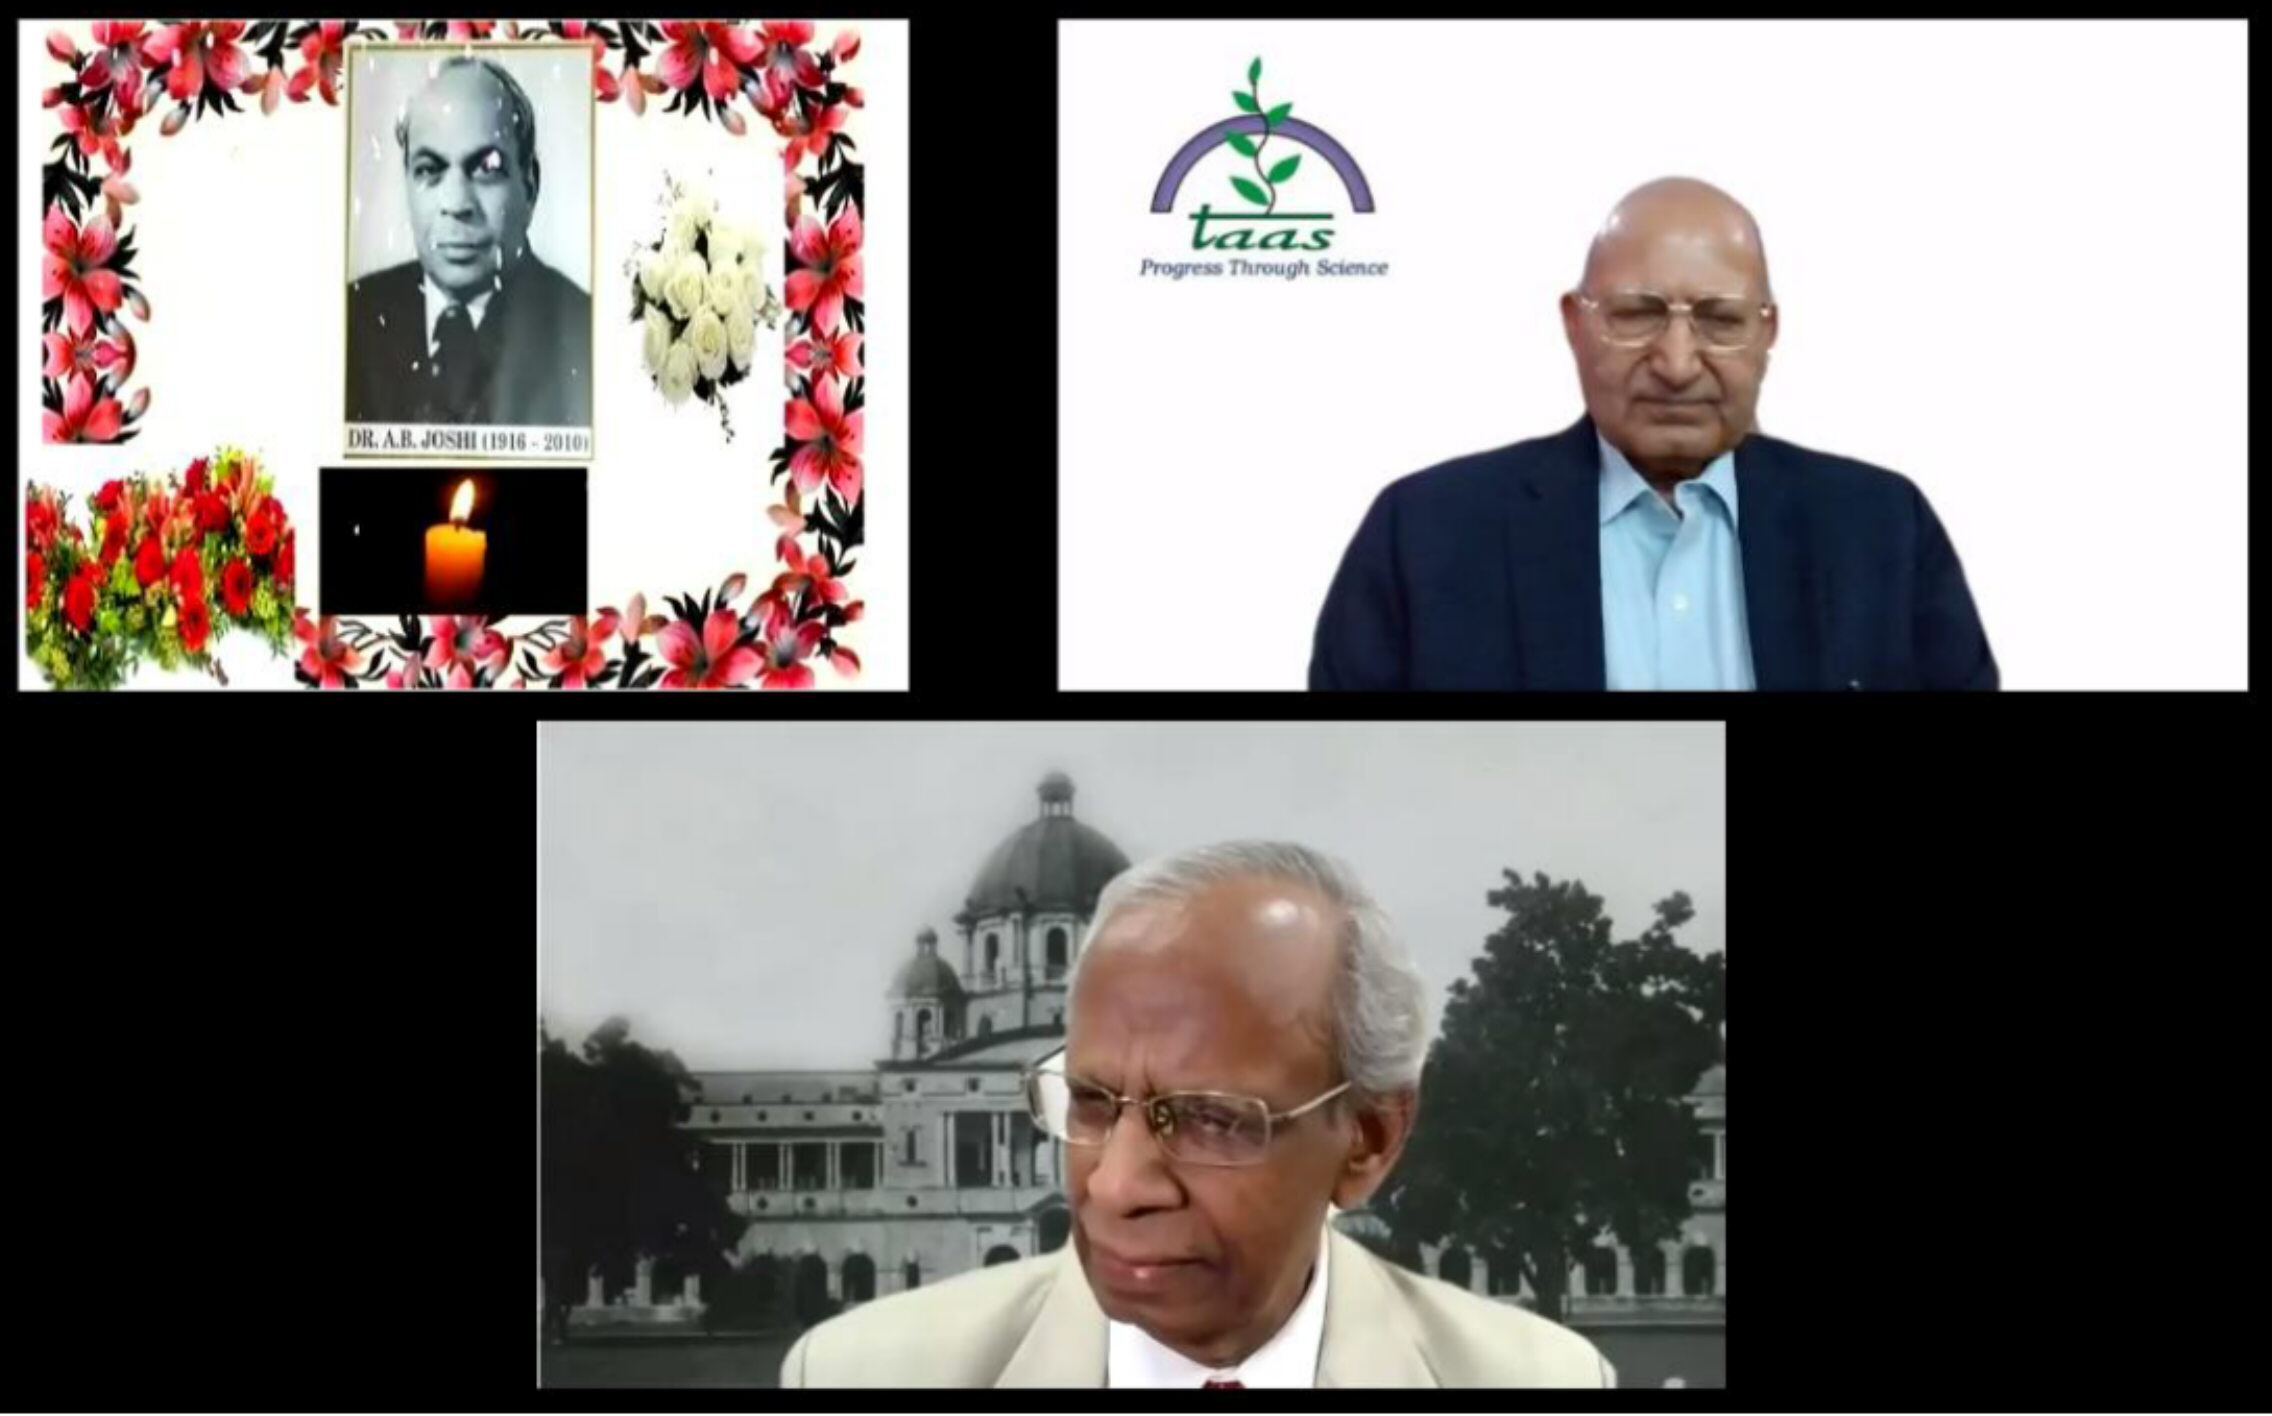 Dr. A.B. Joshi Memorial Lecture by Dr. Dr. R.S. Paroda, Former President, NAAS and Chairman TAAS Chaired by Prof. R.B. Singh, Former President, NAAS at XV ASC